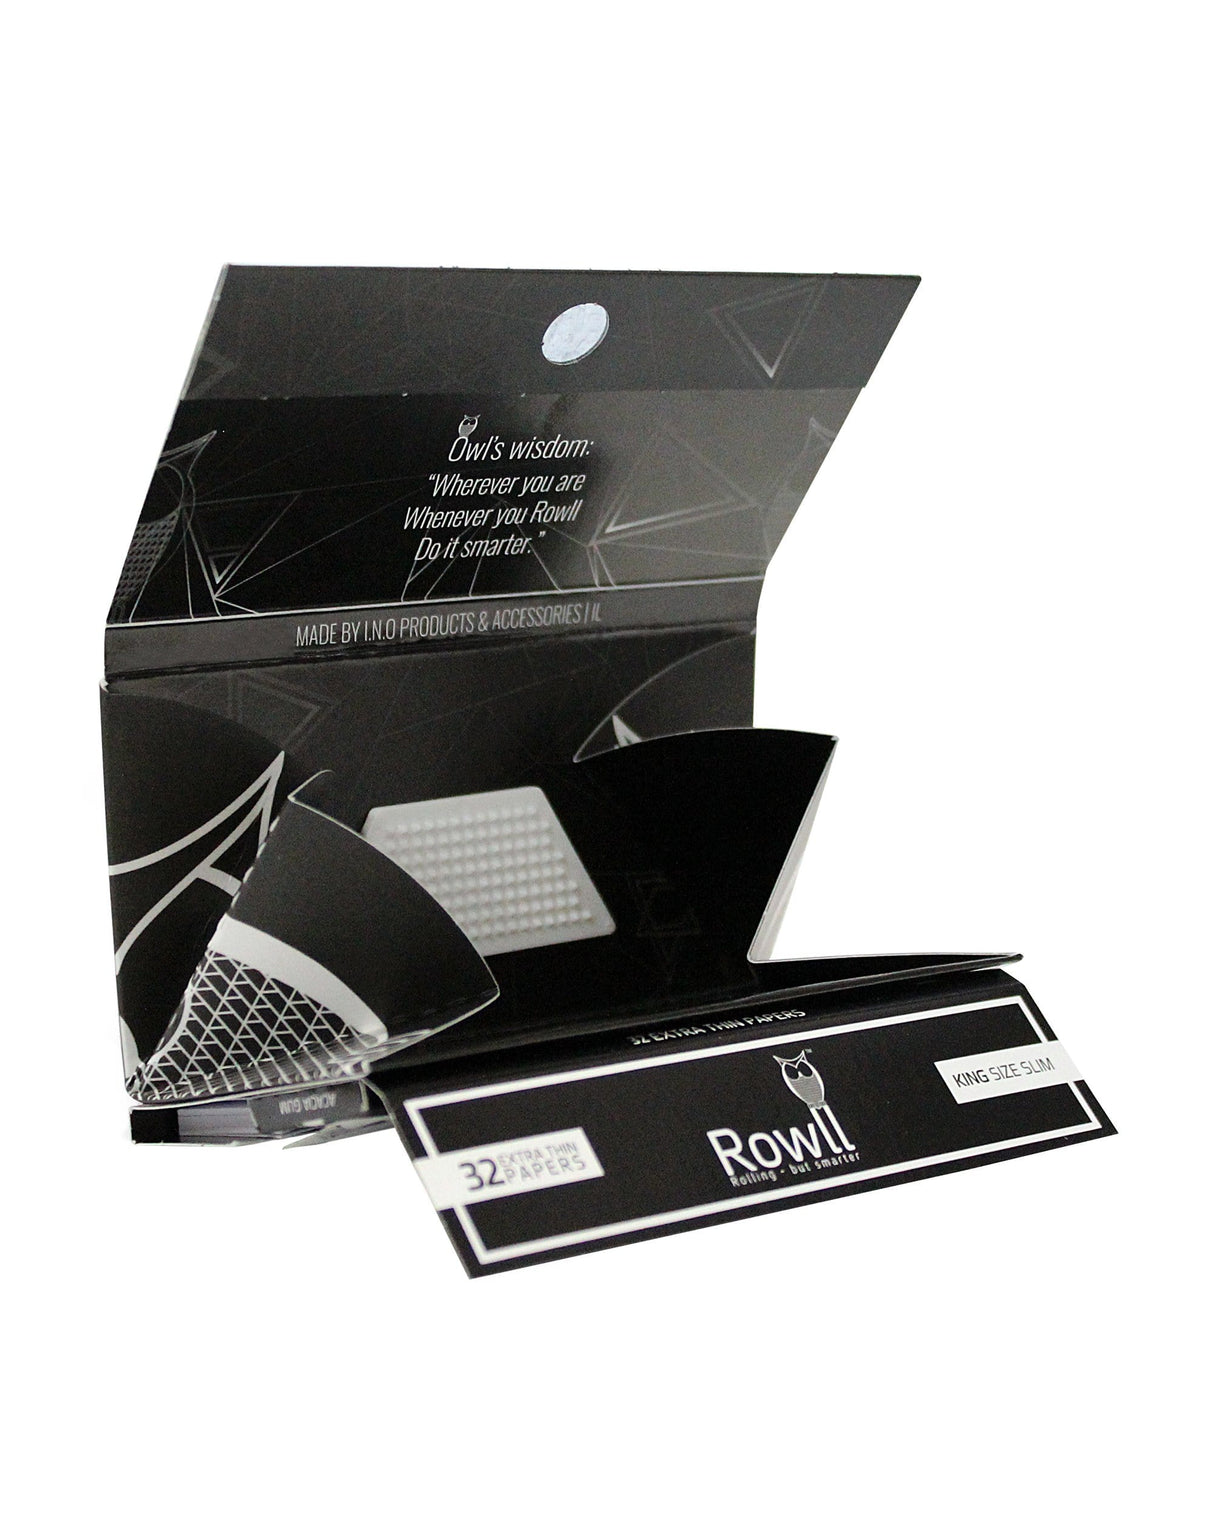 Rowll Rolling Paper Kit open pack with card grinder and tips for dry herbs, portable design